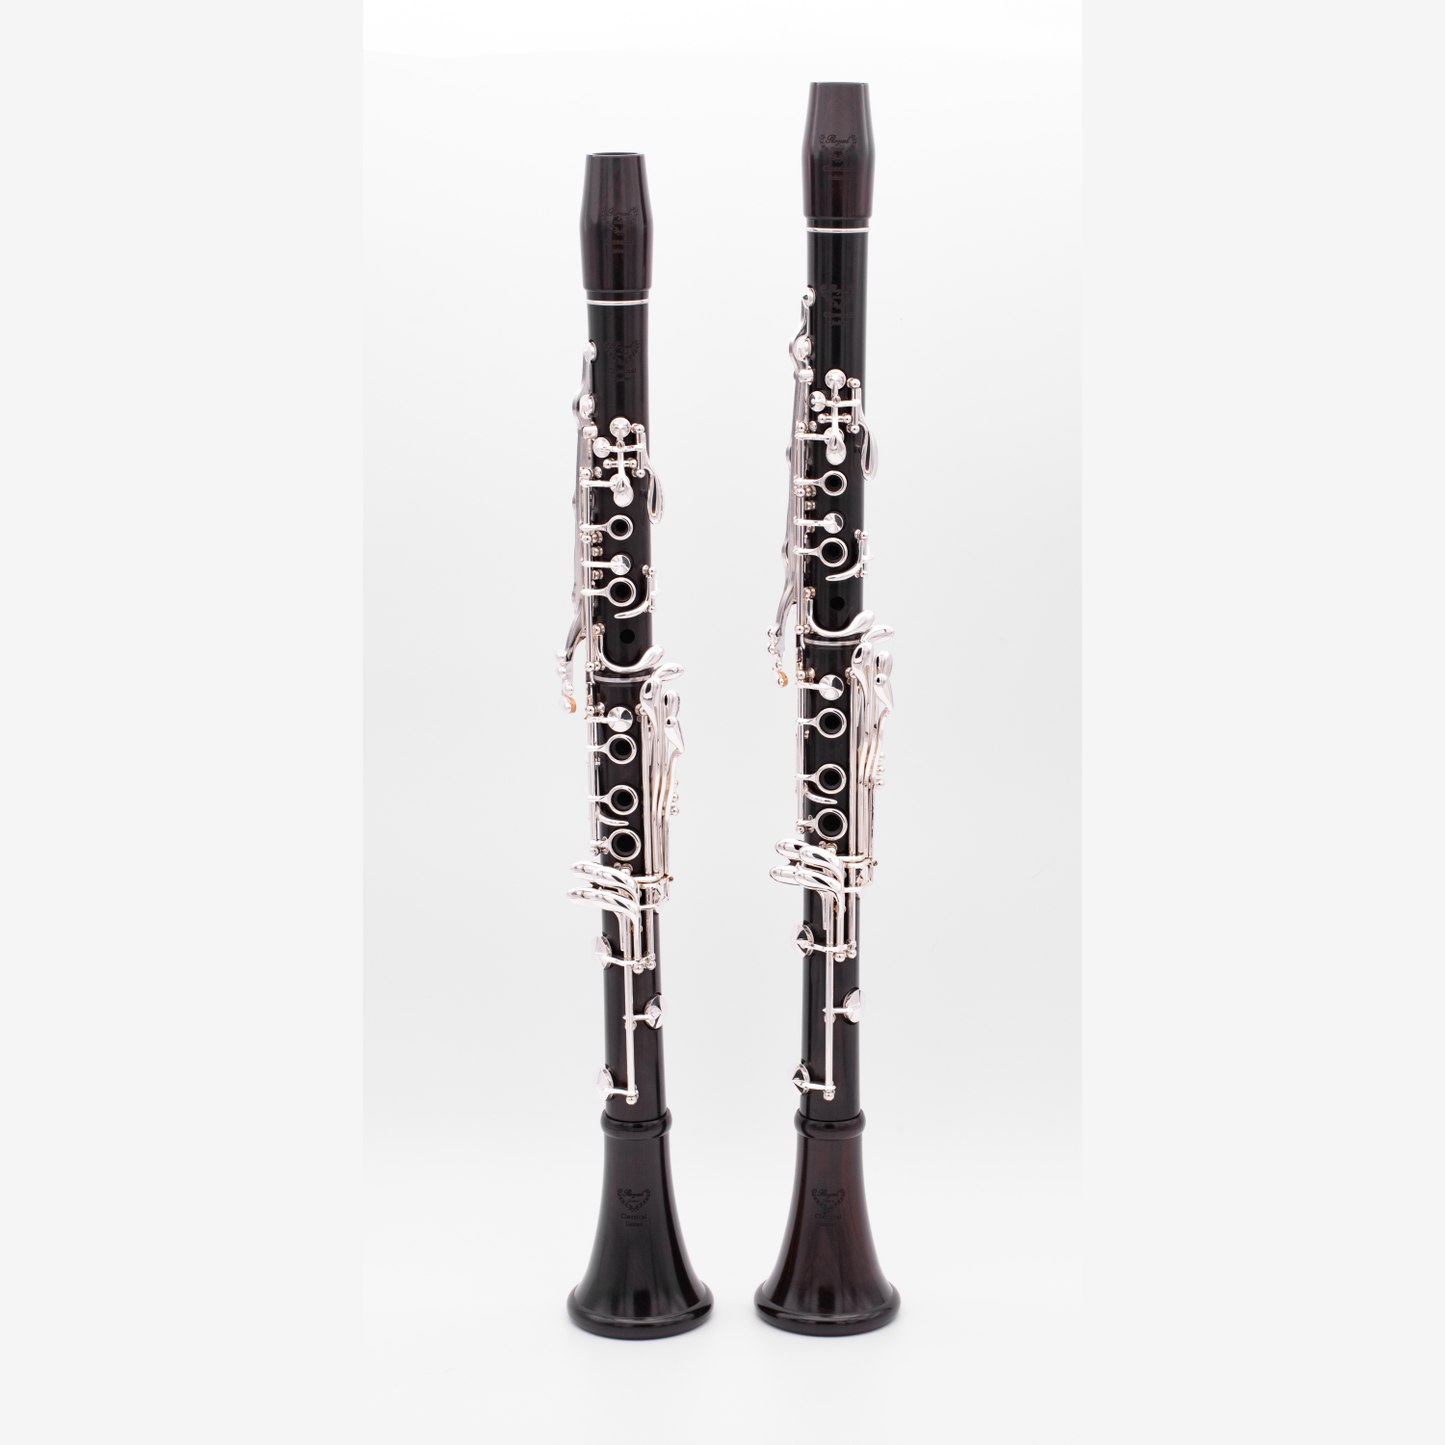 Full length shot of Royal Global Classical Limited Bb and A clarinets on a light gray background